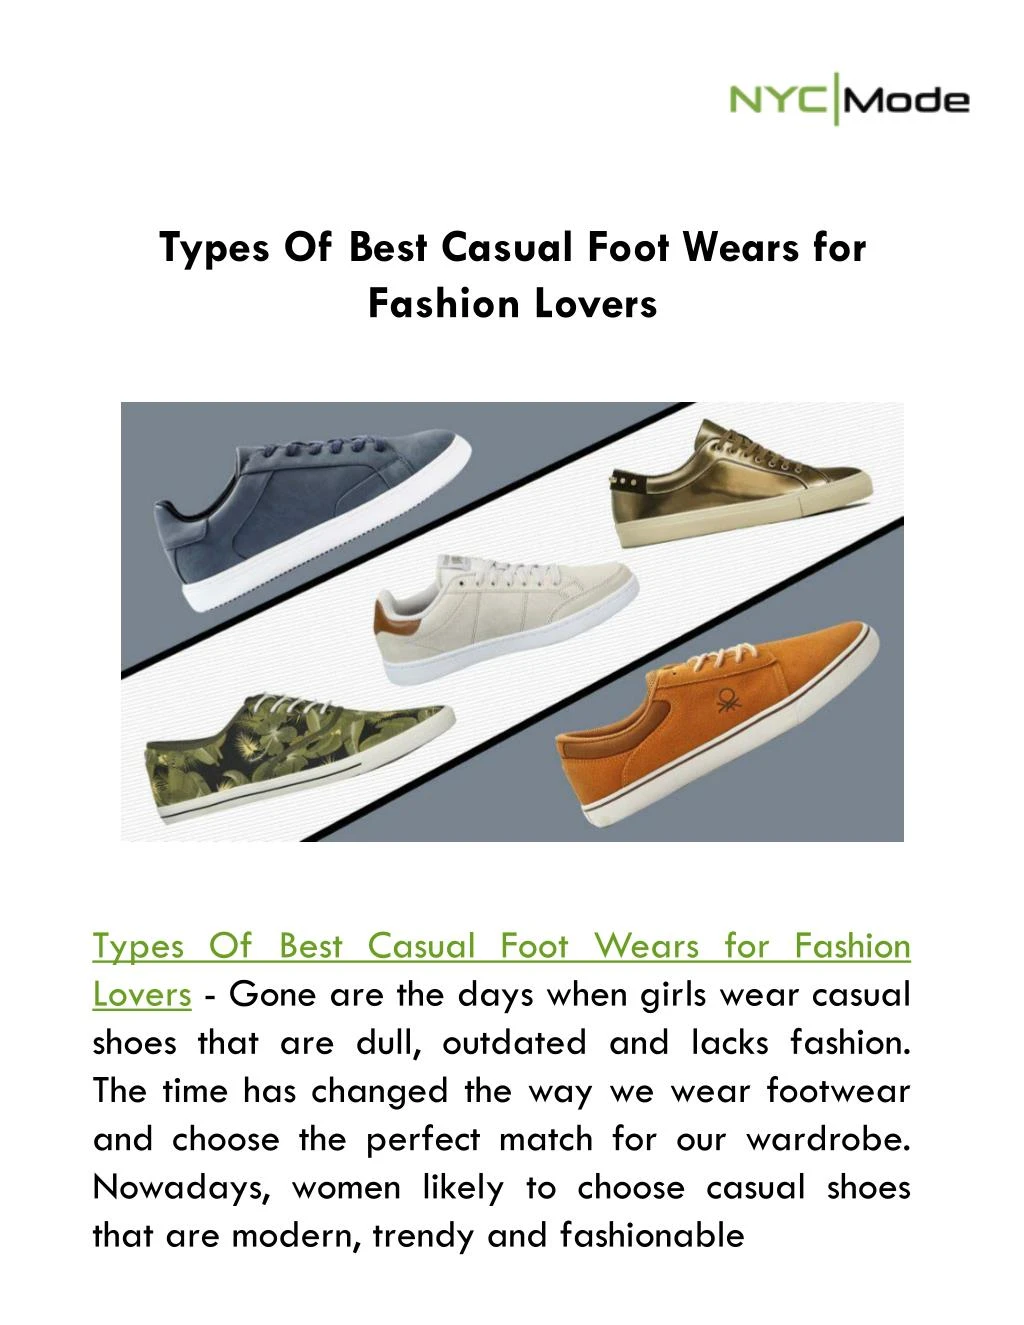 types of best casual foot wears for fashion lovers